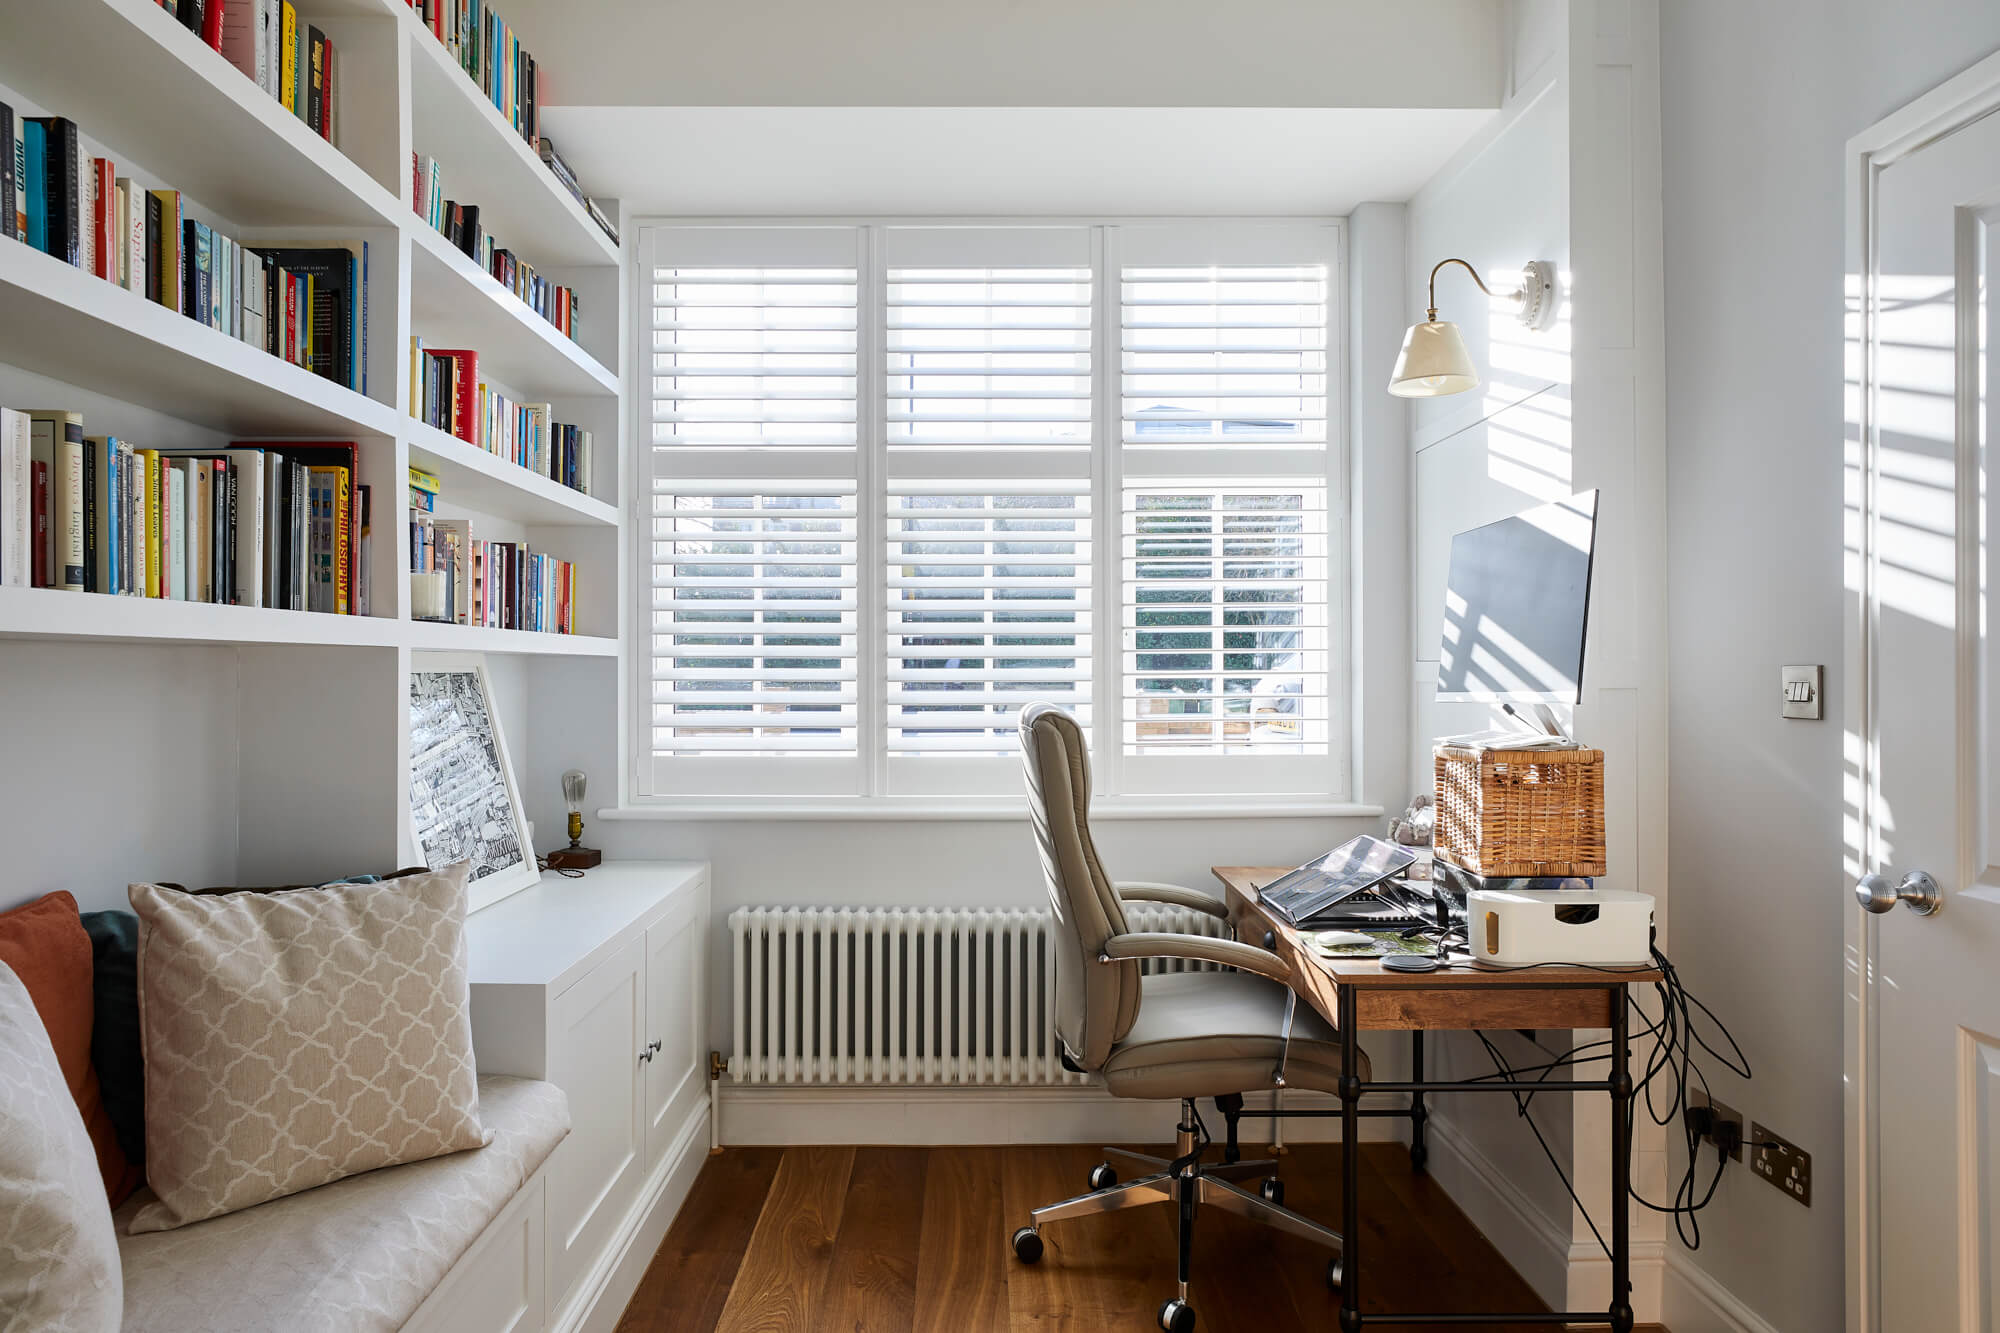 Interior design ideas for modern home office space